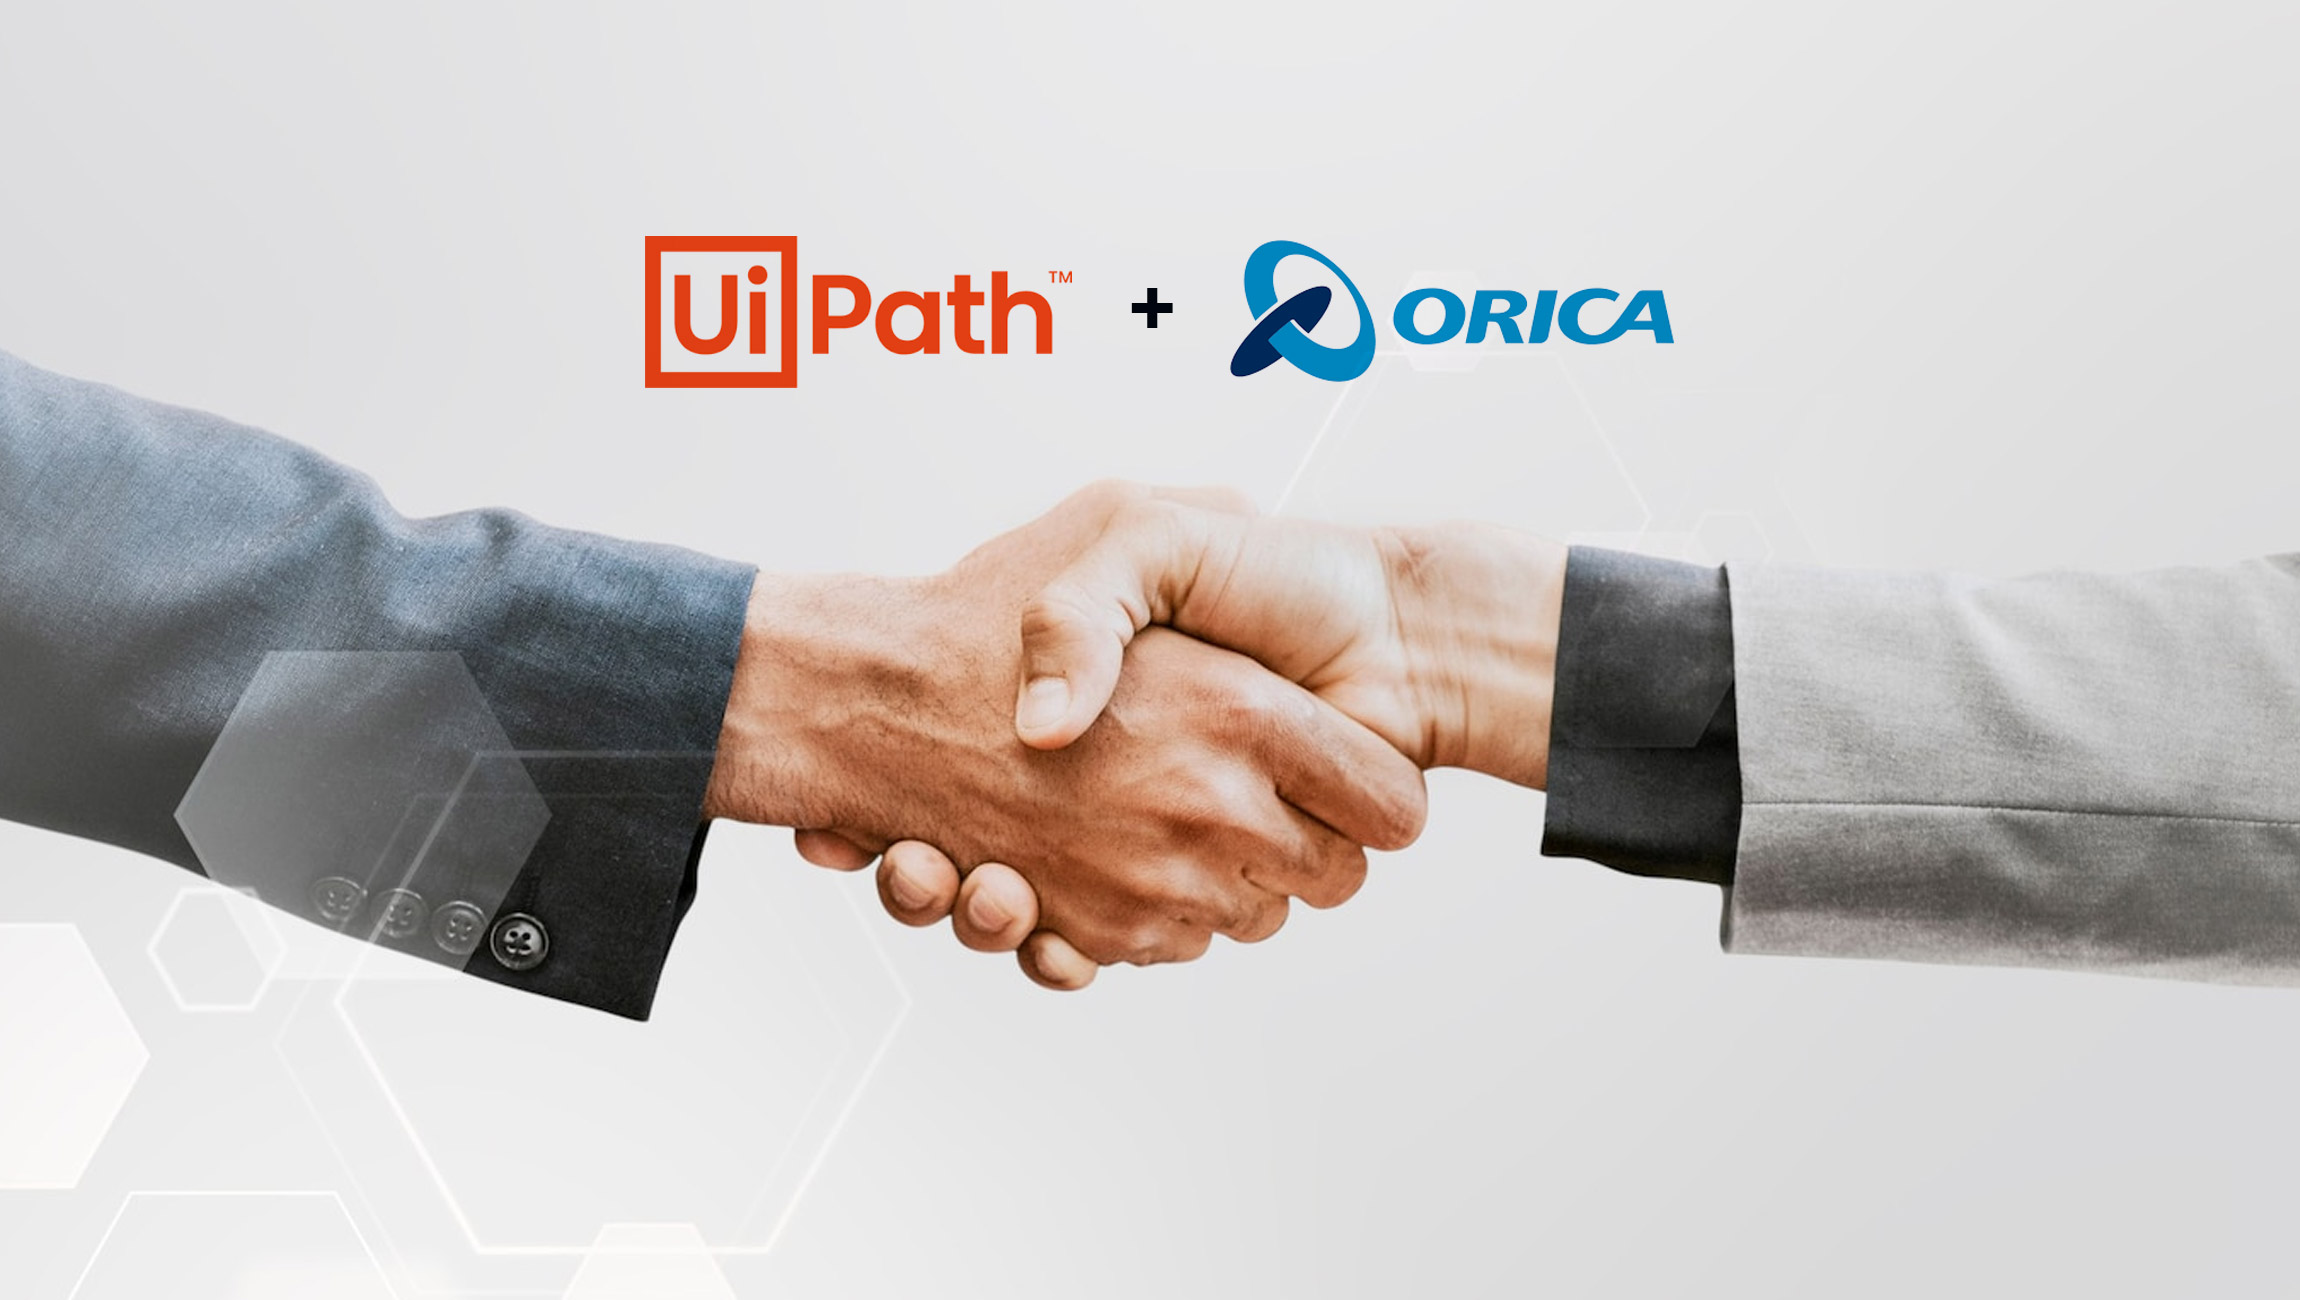 UiPath Announces Global Partnership with Orica to Scale Application Testing and Automation Capabilities, Deliver Enterprise-wide Process Efficiencies